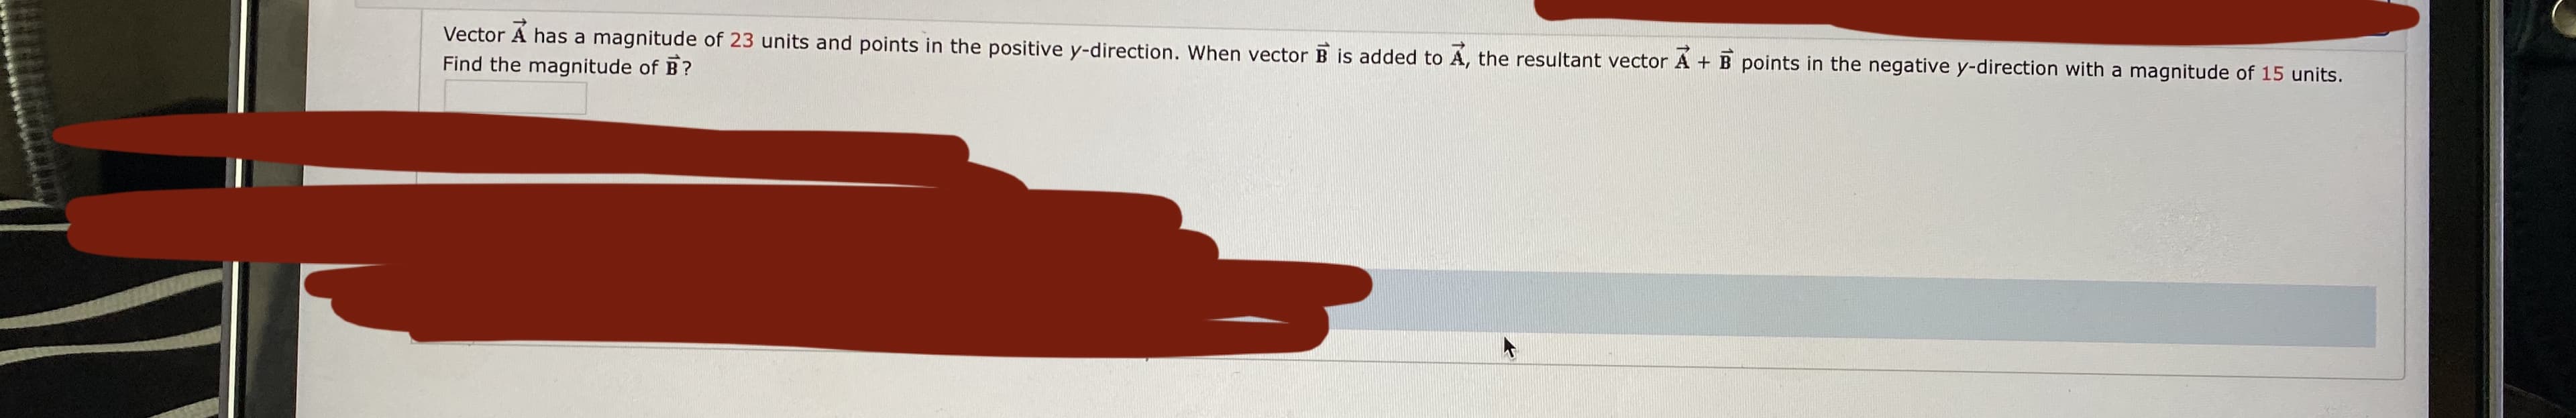 Vector A has a magnitude of 23 units and points in the positive y-direction. When vector B is added to A, the resultant vector A + B points in the negative y-direction with a magnitude of 15 units.
Find the magnitude of B?
